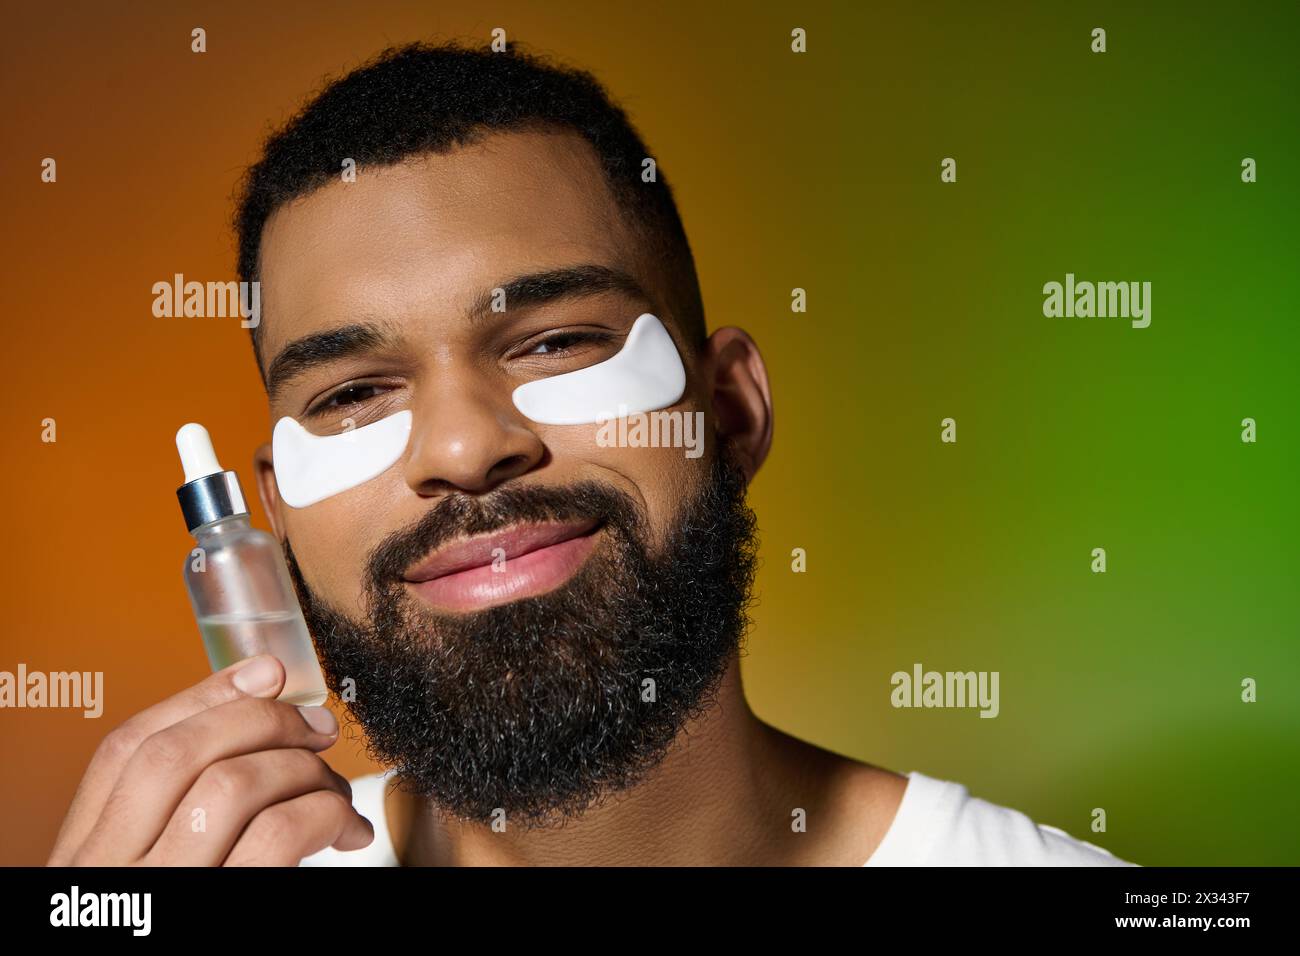 Handsome young man with beard and eye patches. Stock Photo